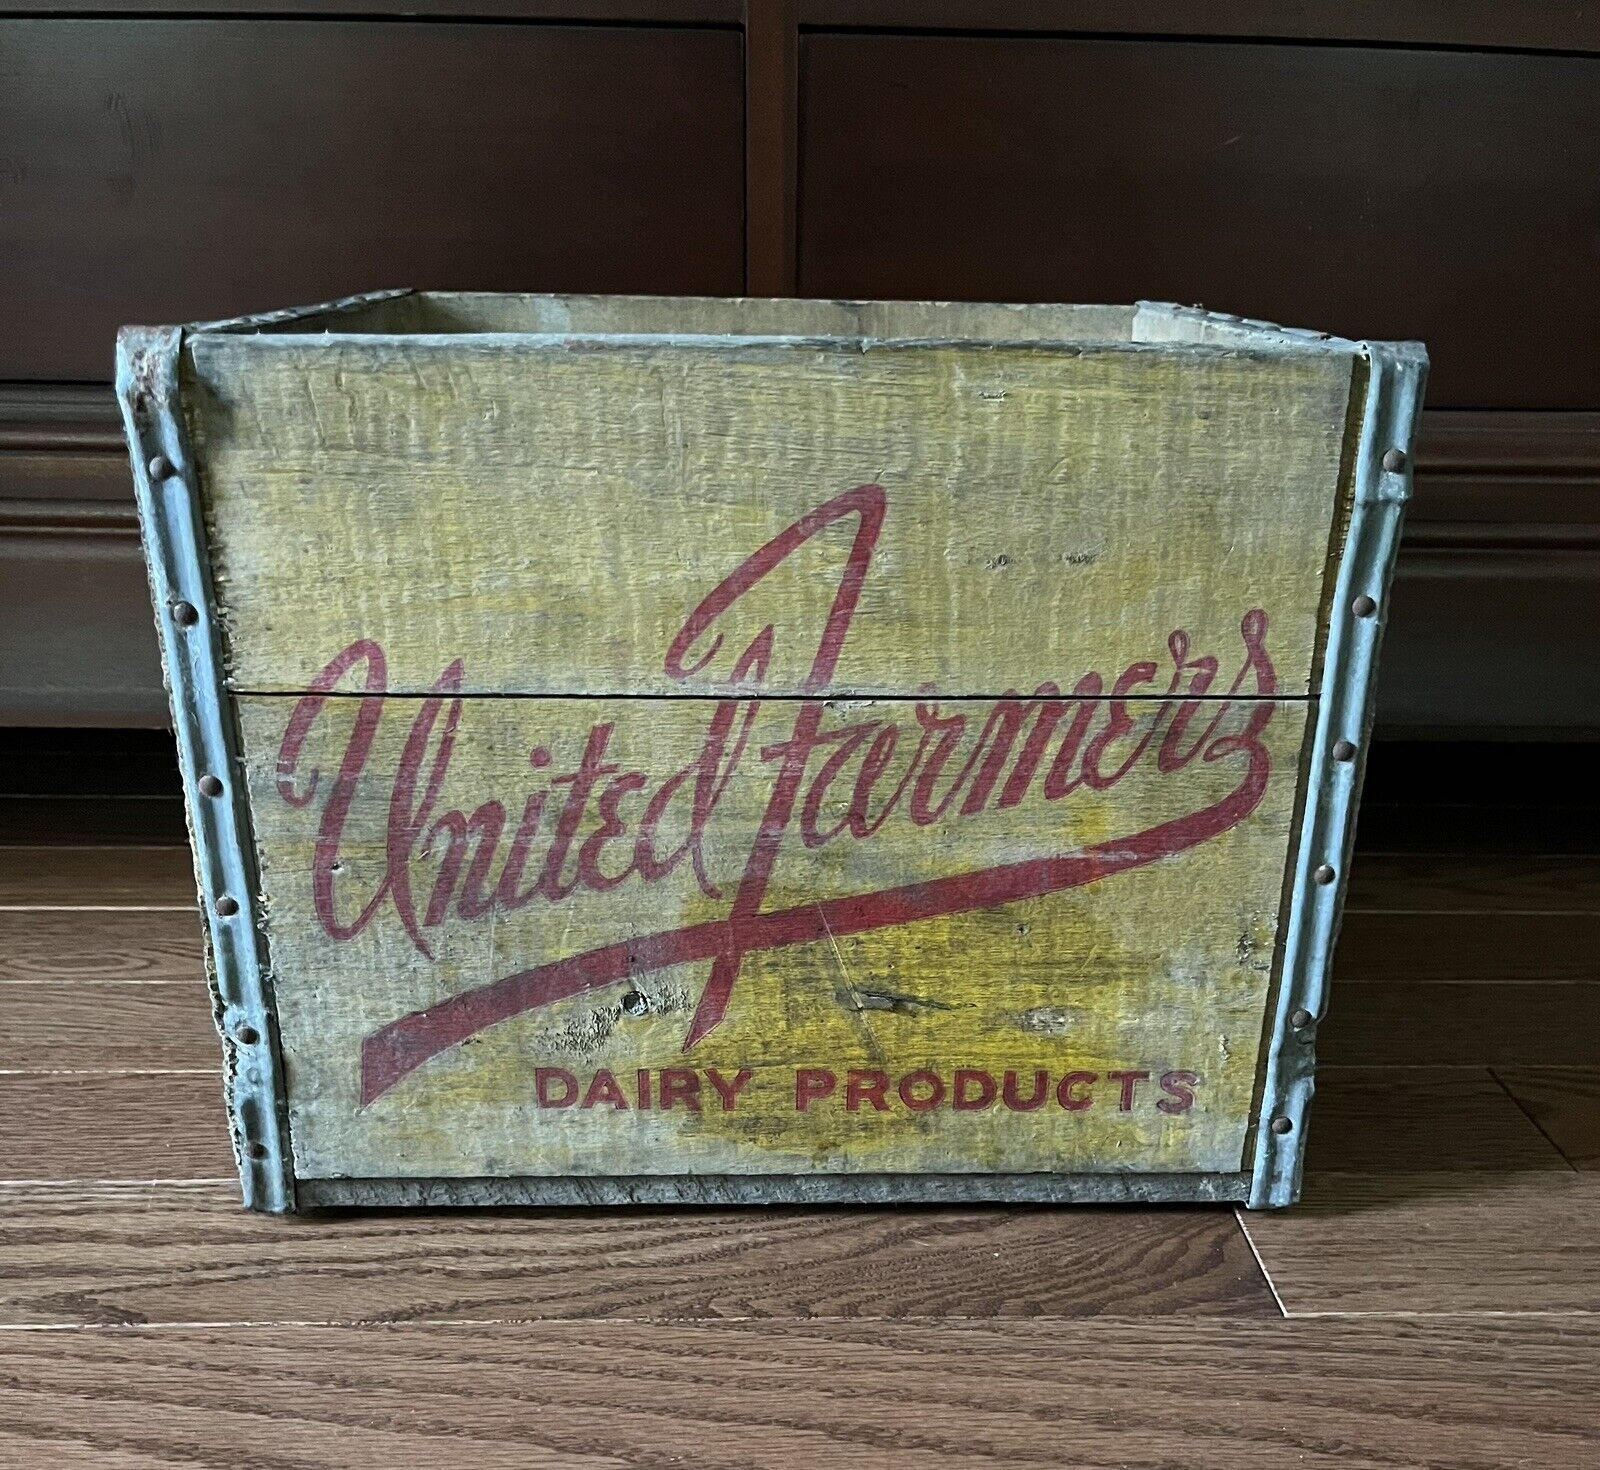 Vintage United Farmers Dairy Products Wooden Crate